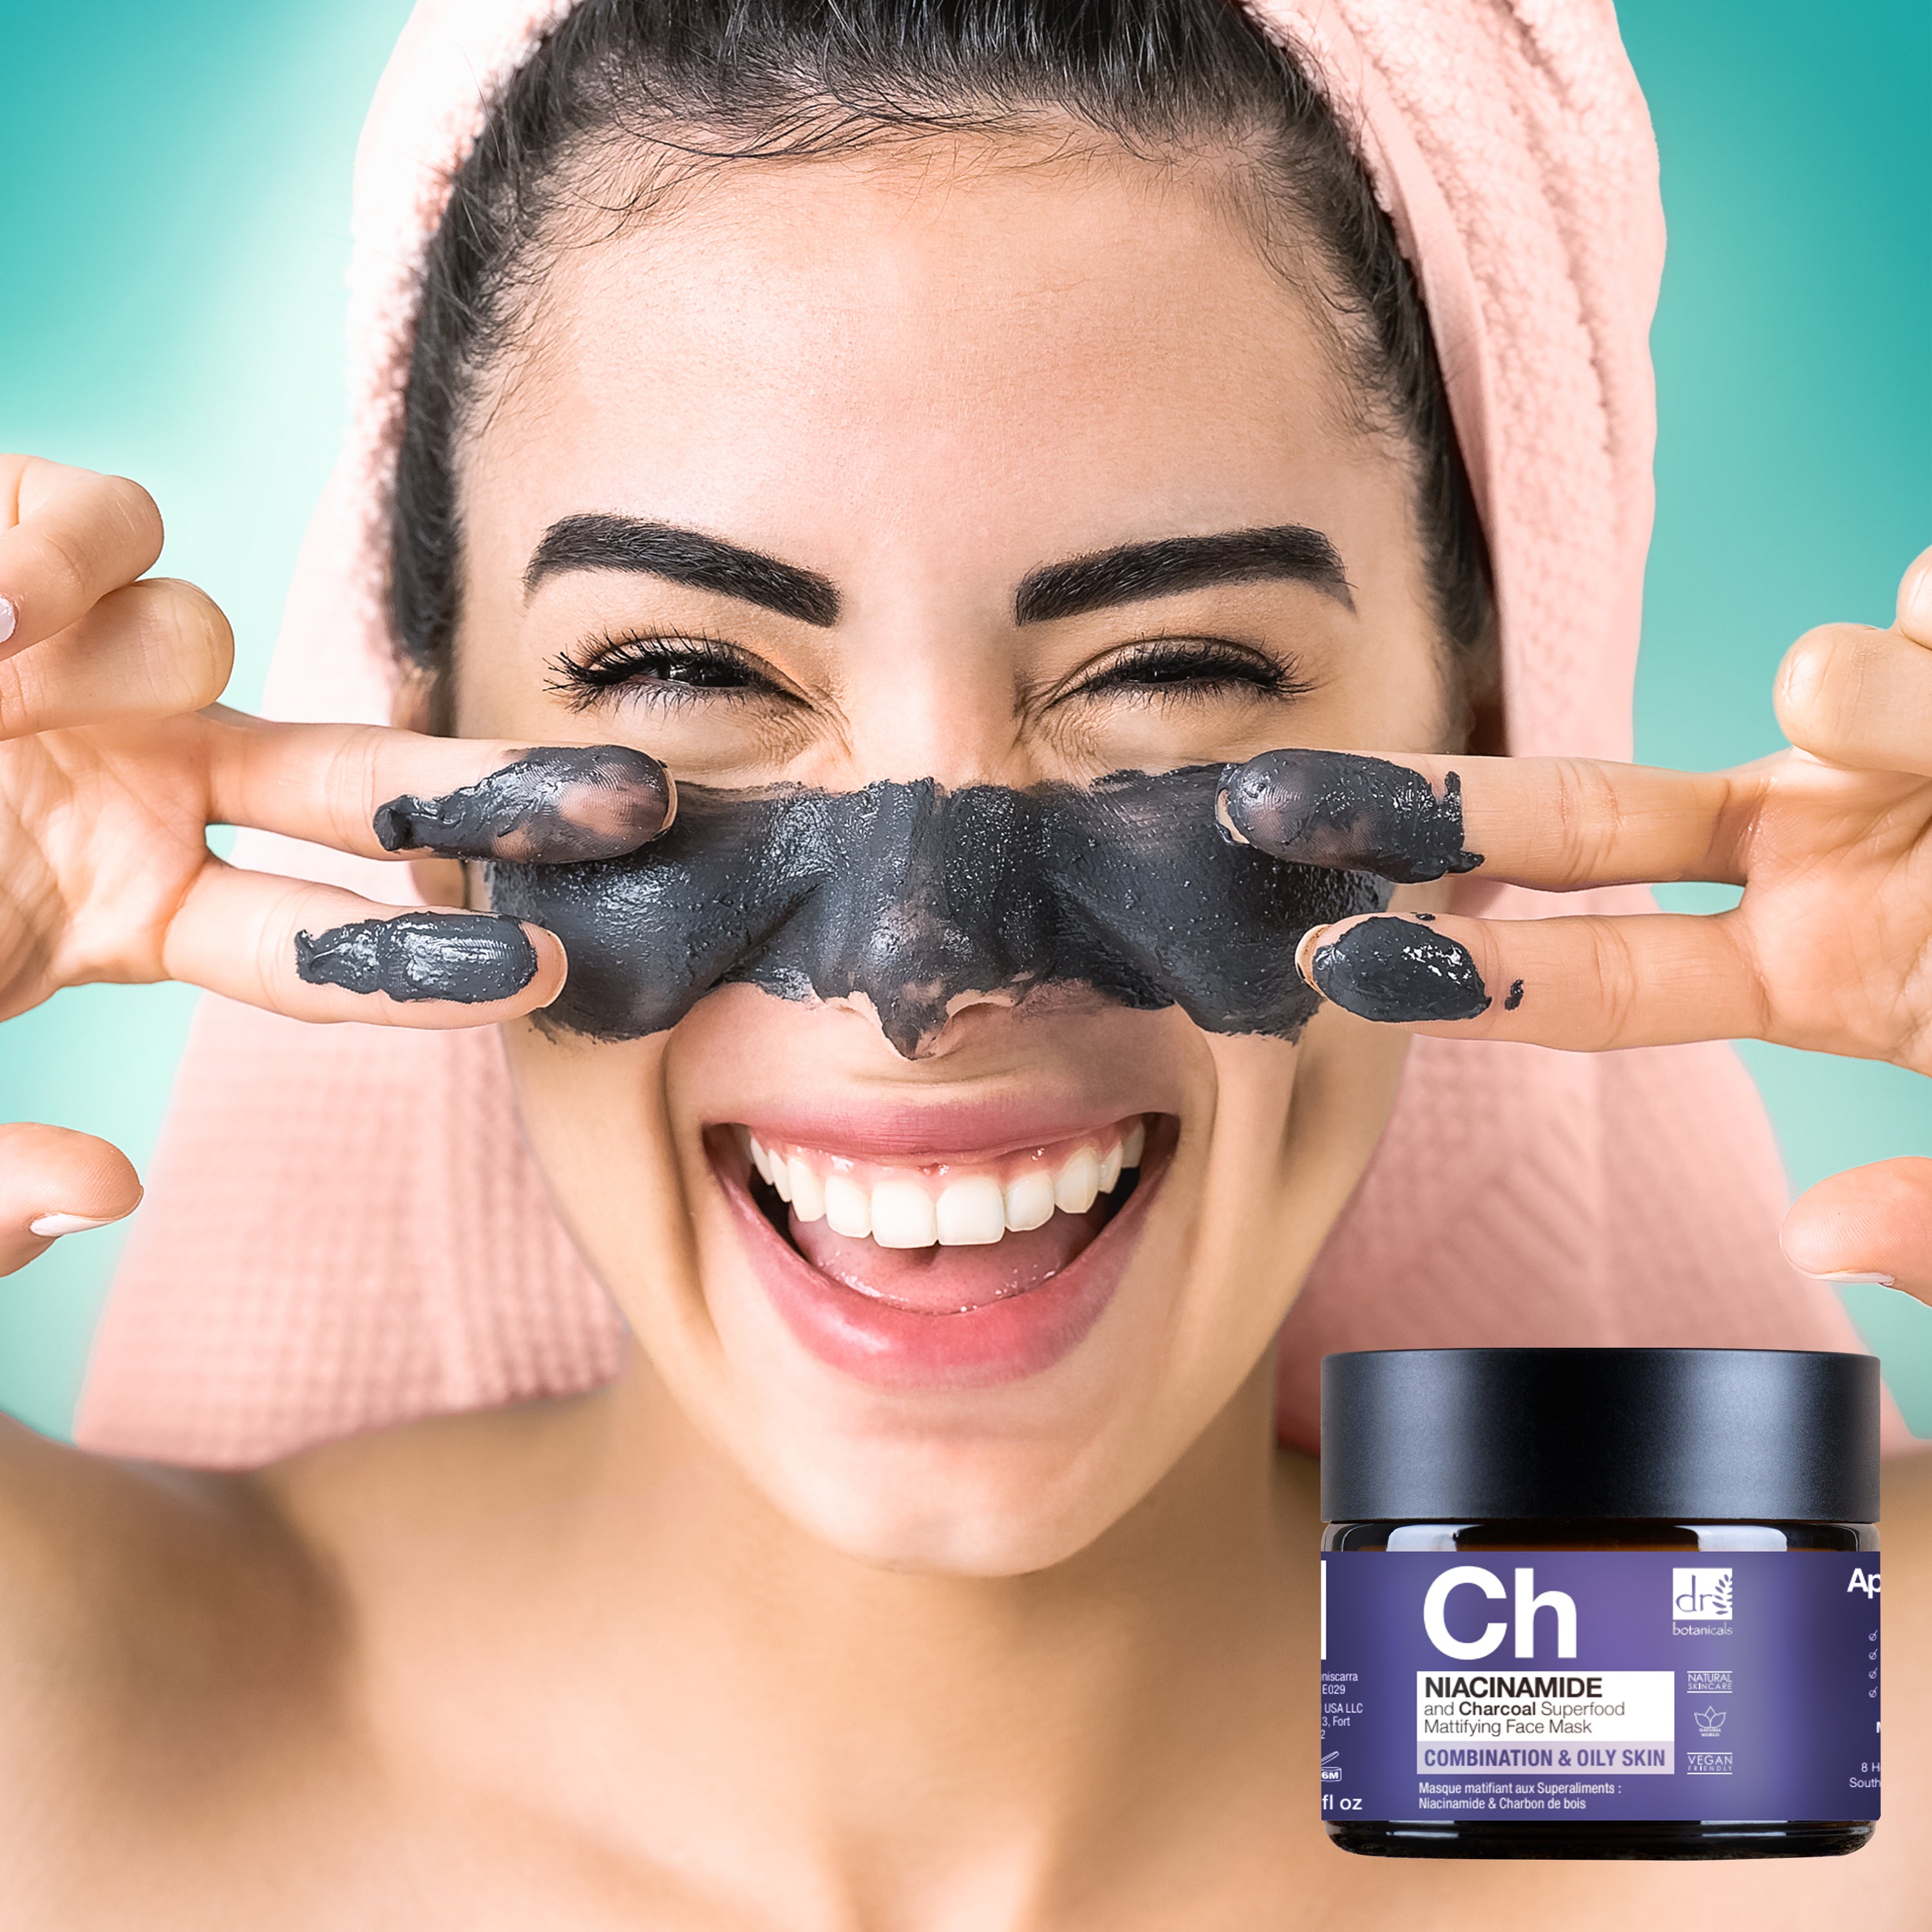 Charcoal Superfood Face Mask Duo